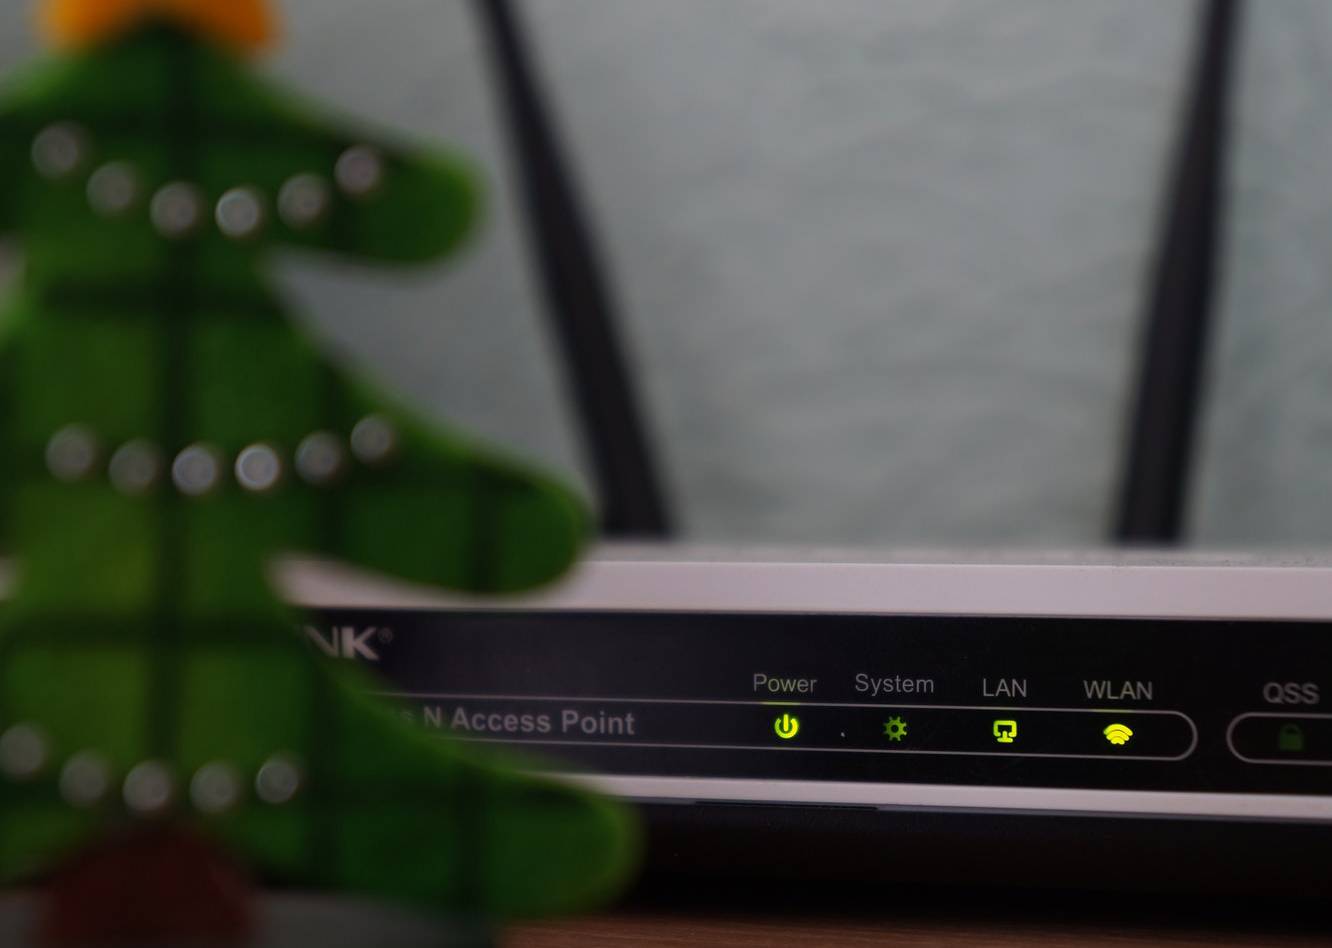 Hundreds of vulnerable TP-Link routers at risk of hacking